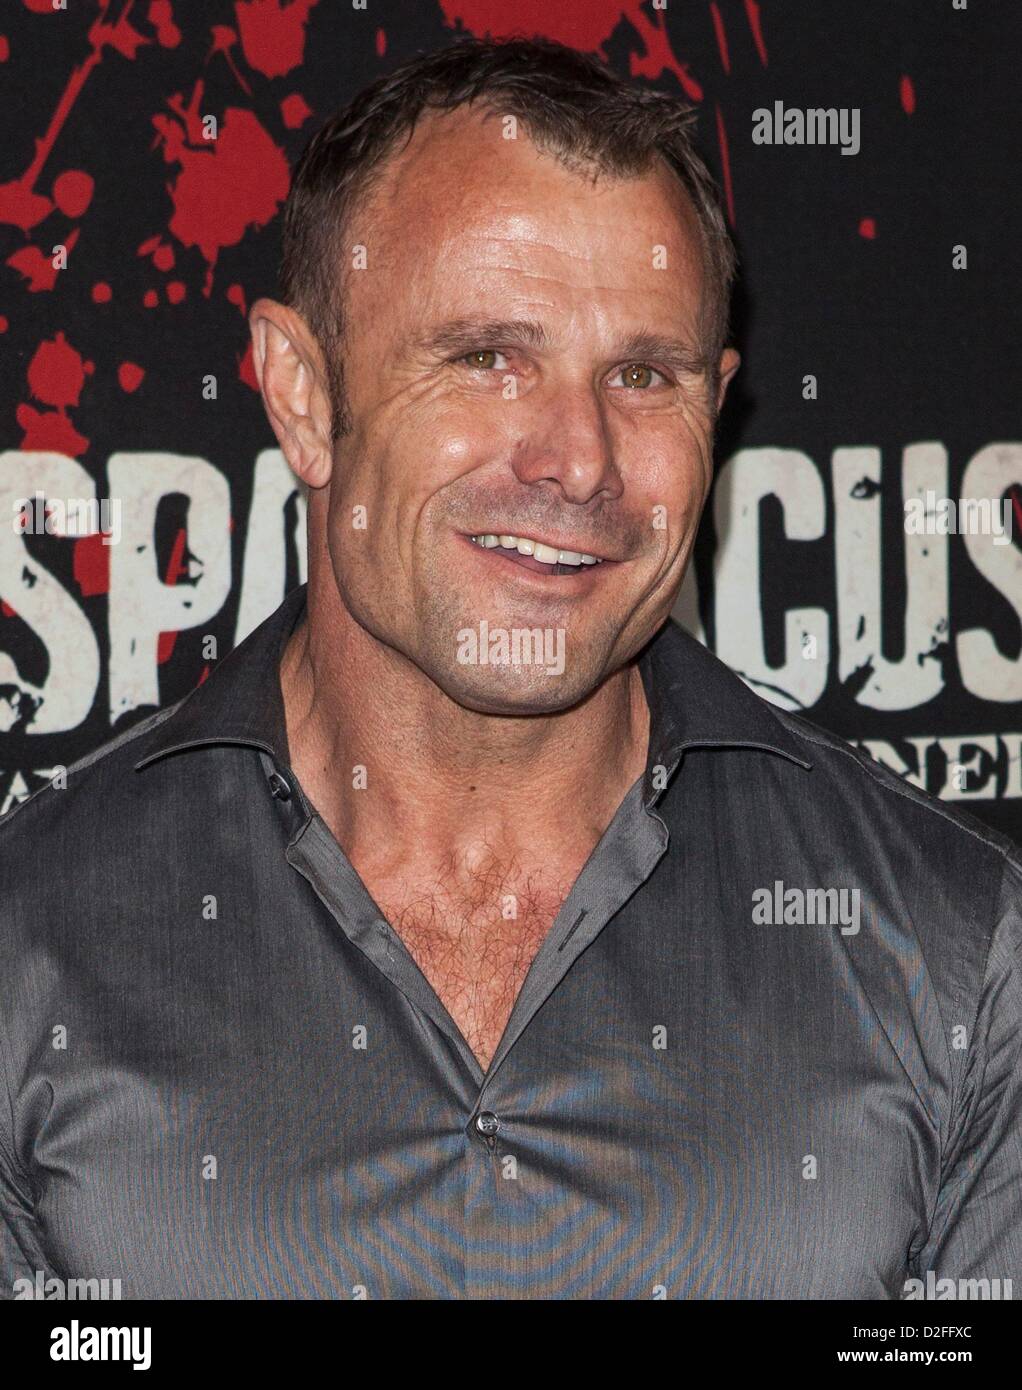 Barry Duffield at arrivals for SPARTACUS: WAR OF THE DAMNED Season  Premiere, Regal Cinemas L.A. Live, Los Angeles, CA January 22, 2013. Photo  By: Emiley Schweich/Everett Collection/Alamy live news Stock Photo -